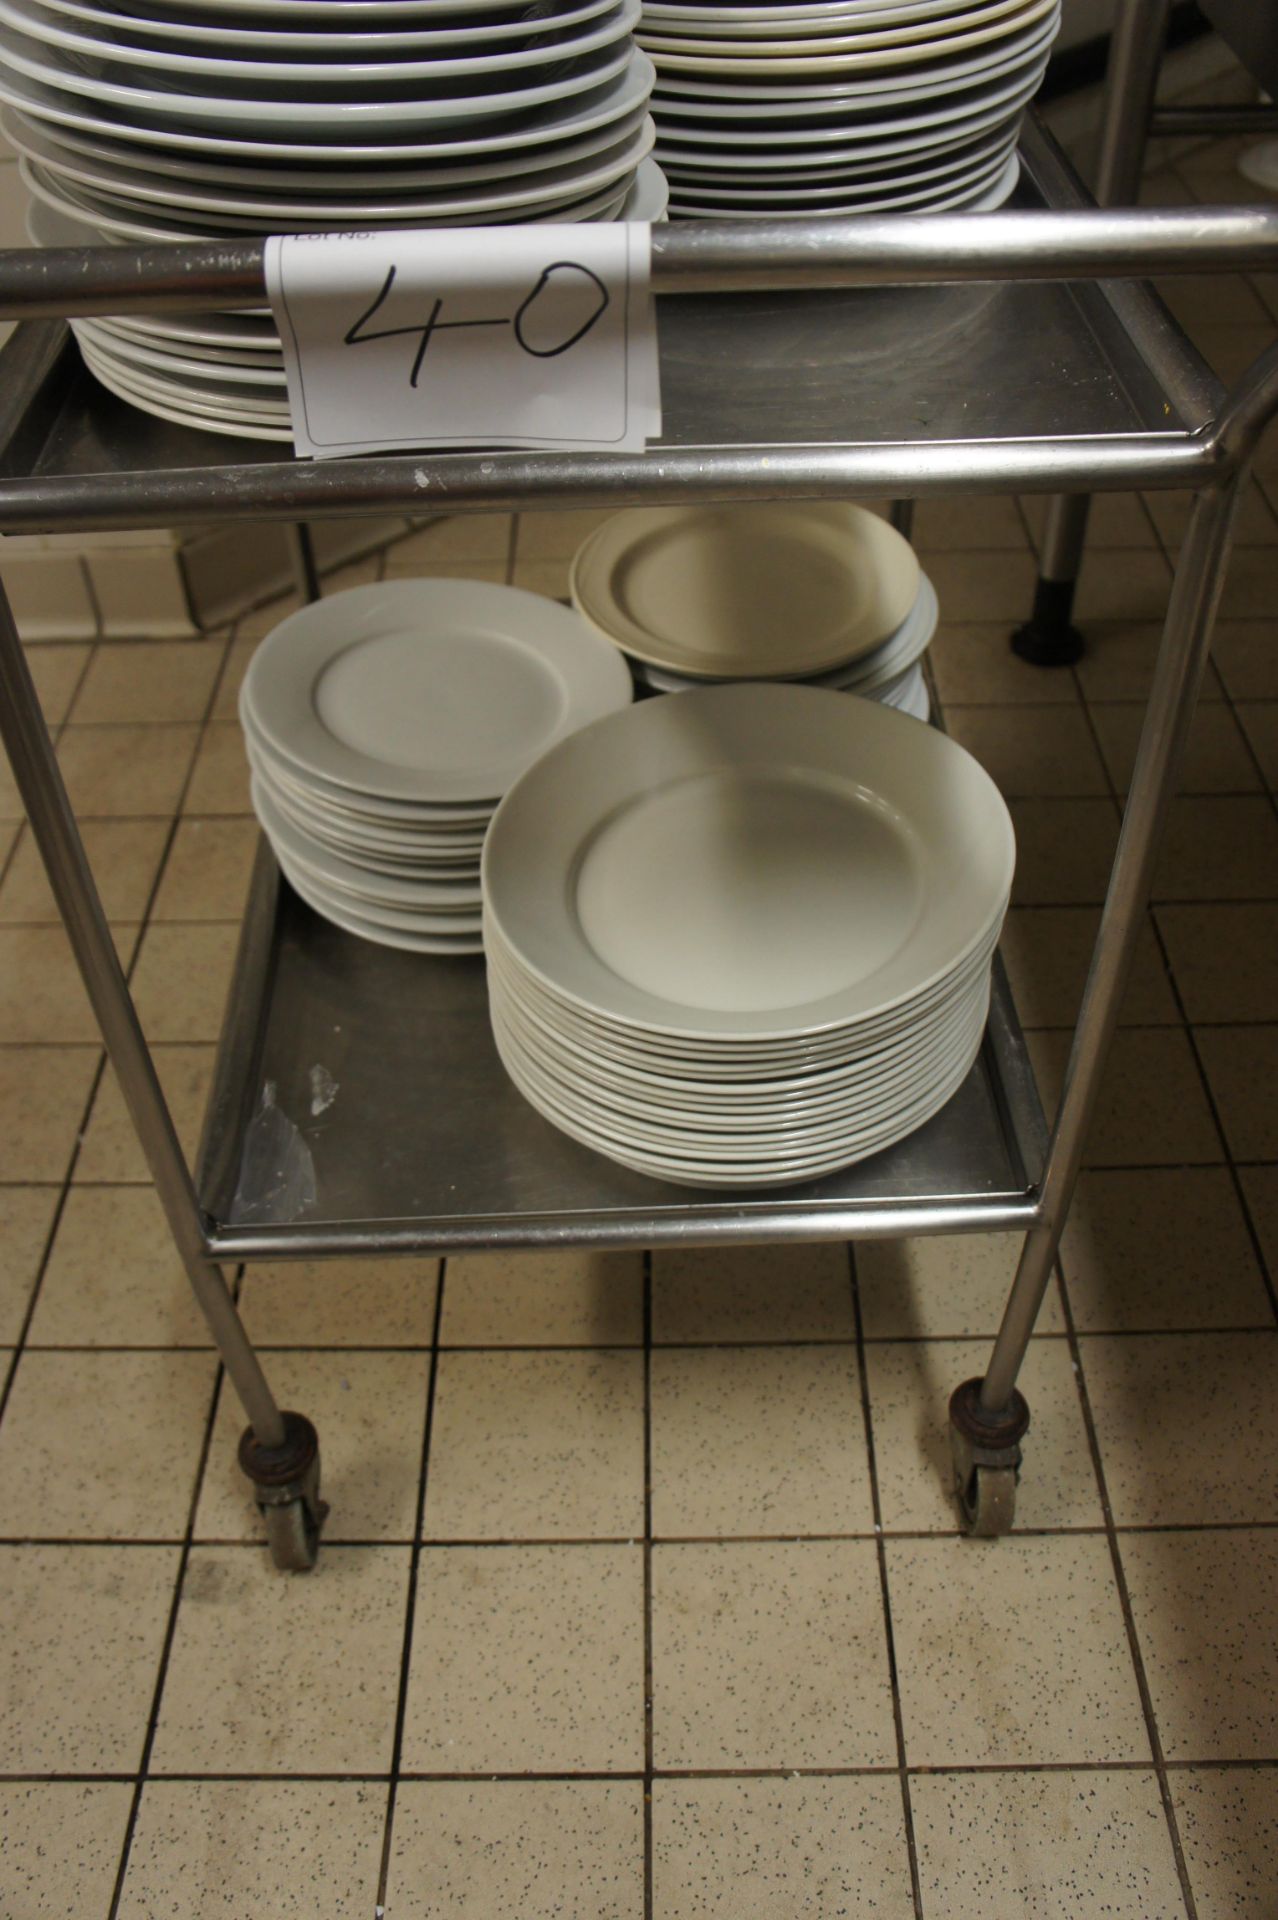 Stainless steel 2 tier service trolley, Contents NOT included - Image 2 of 2